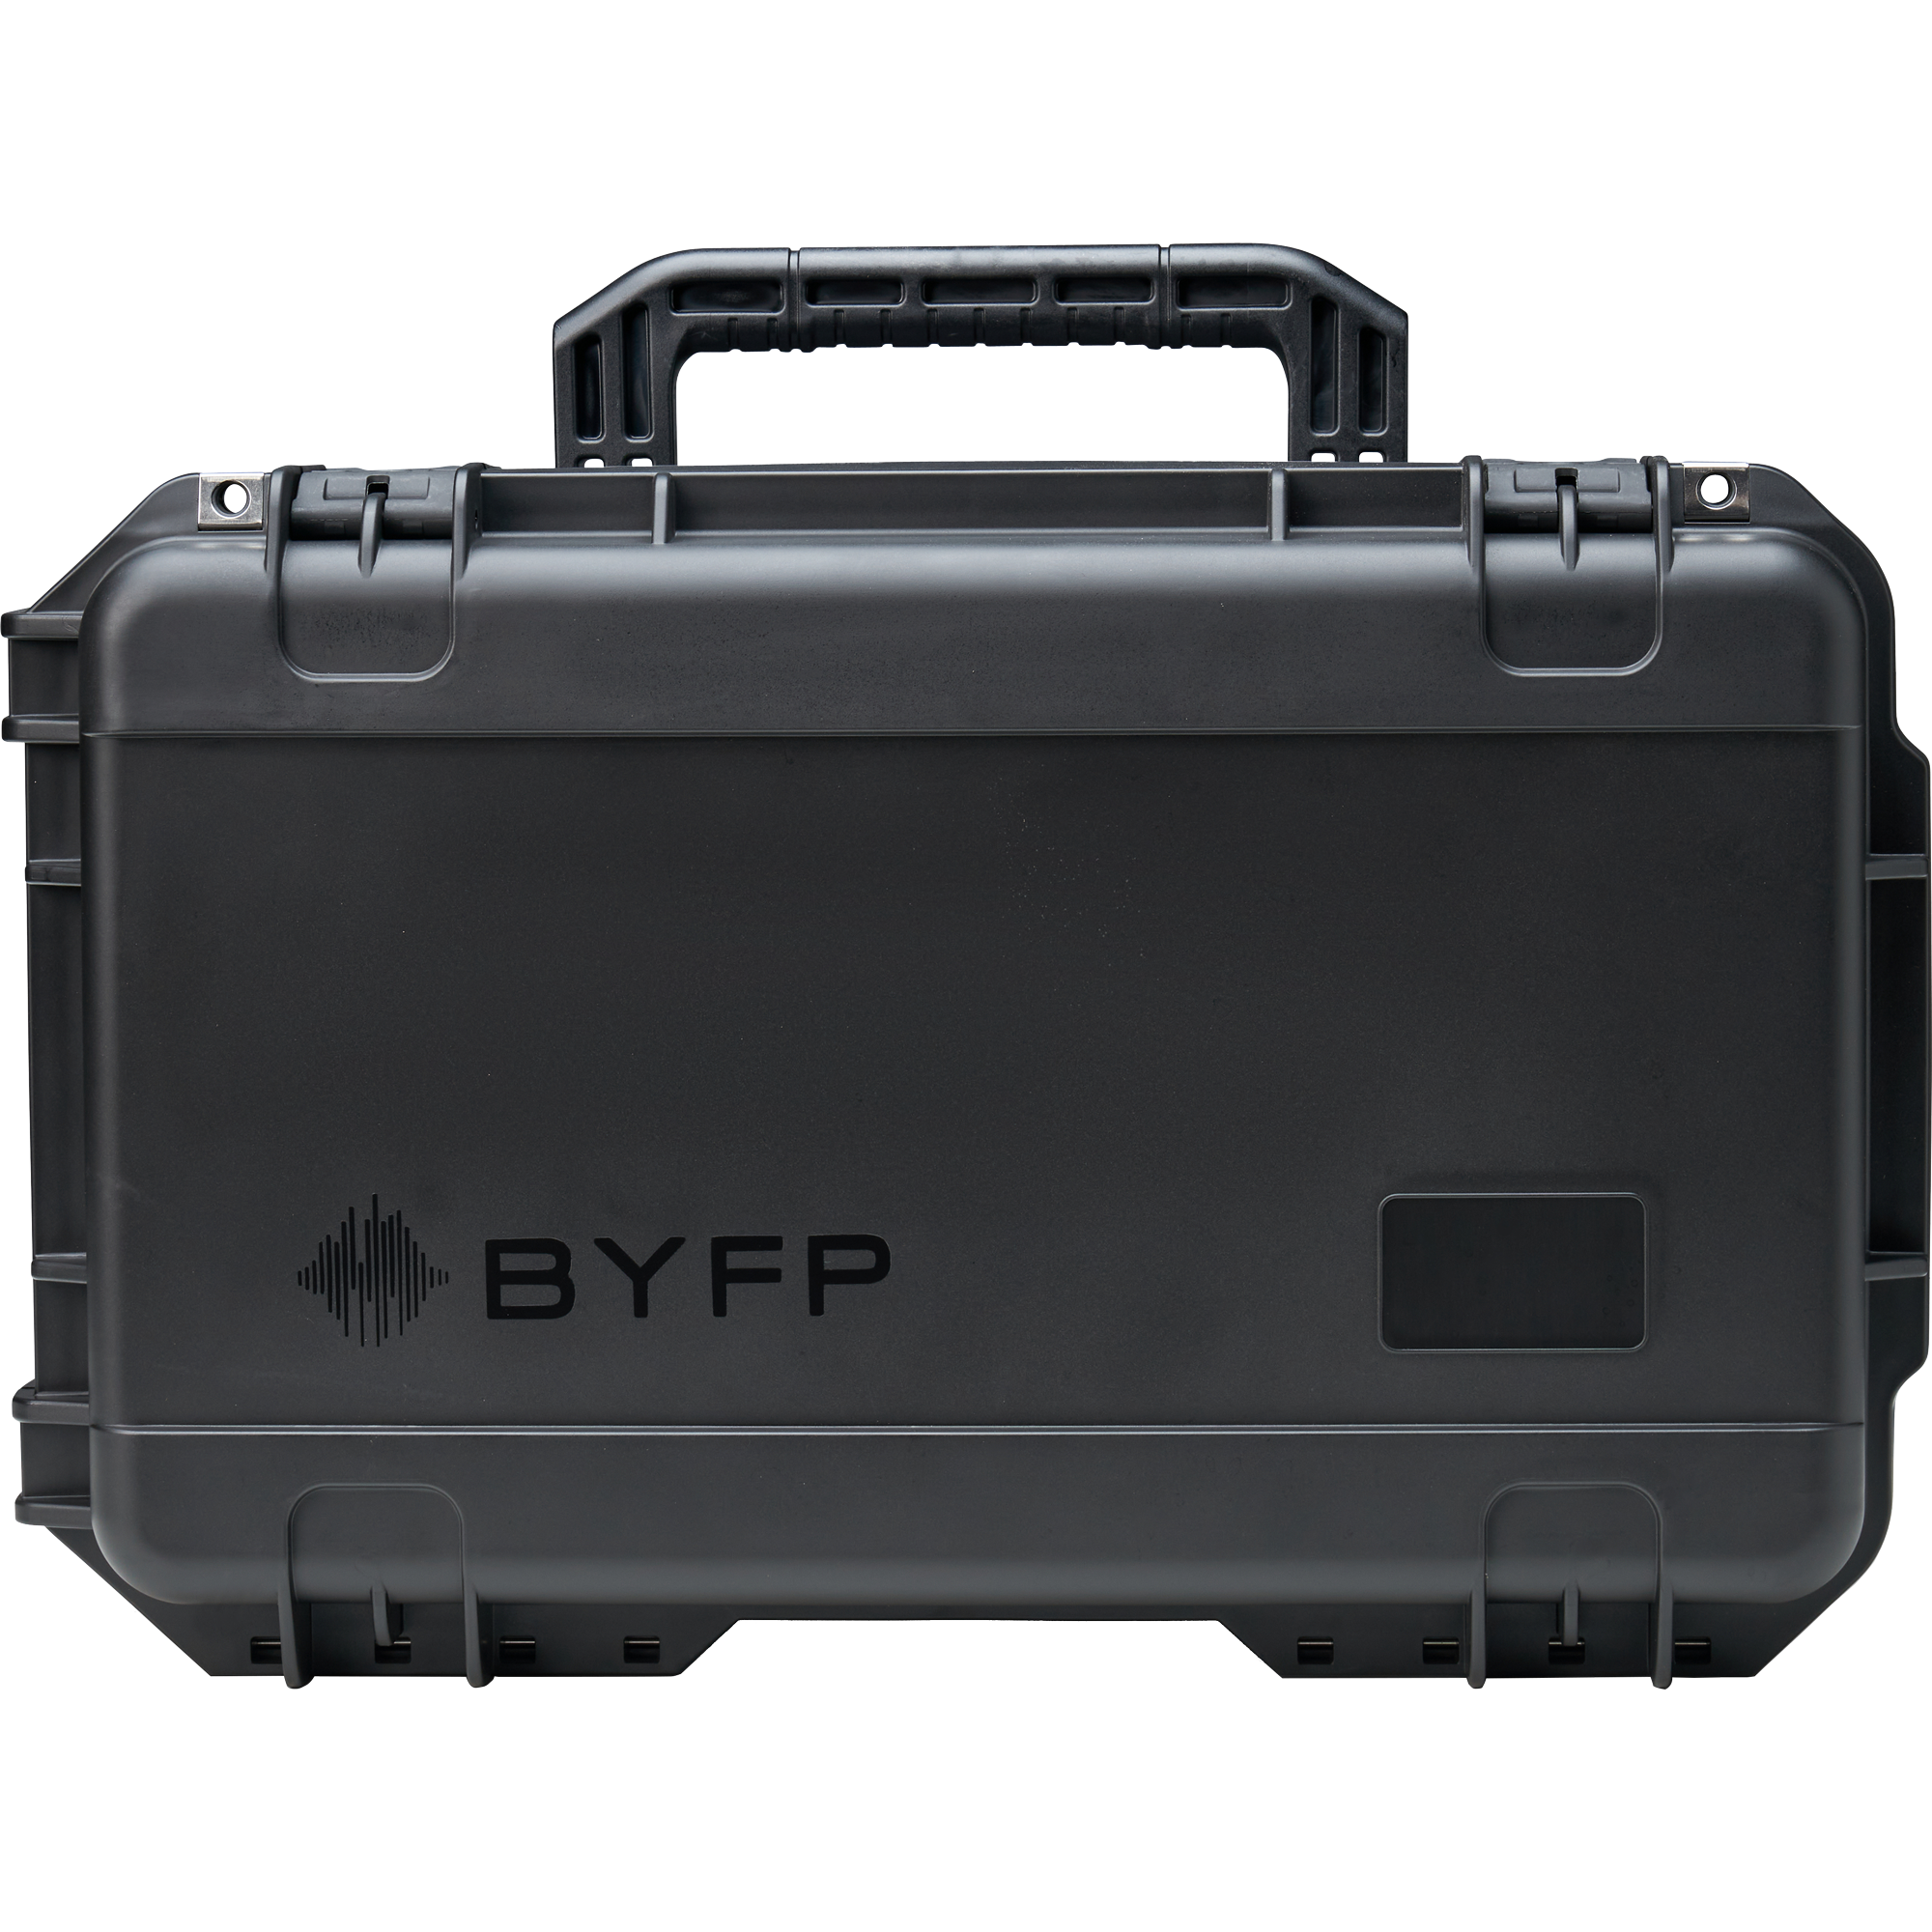 BYFP ipCase for 6x xVision Converters